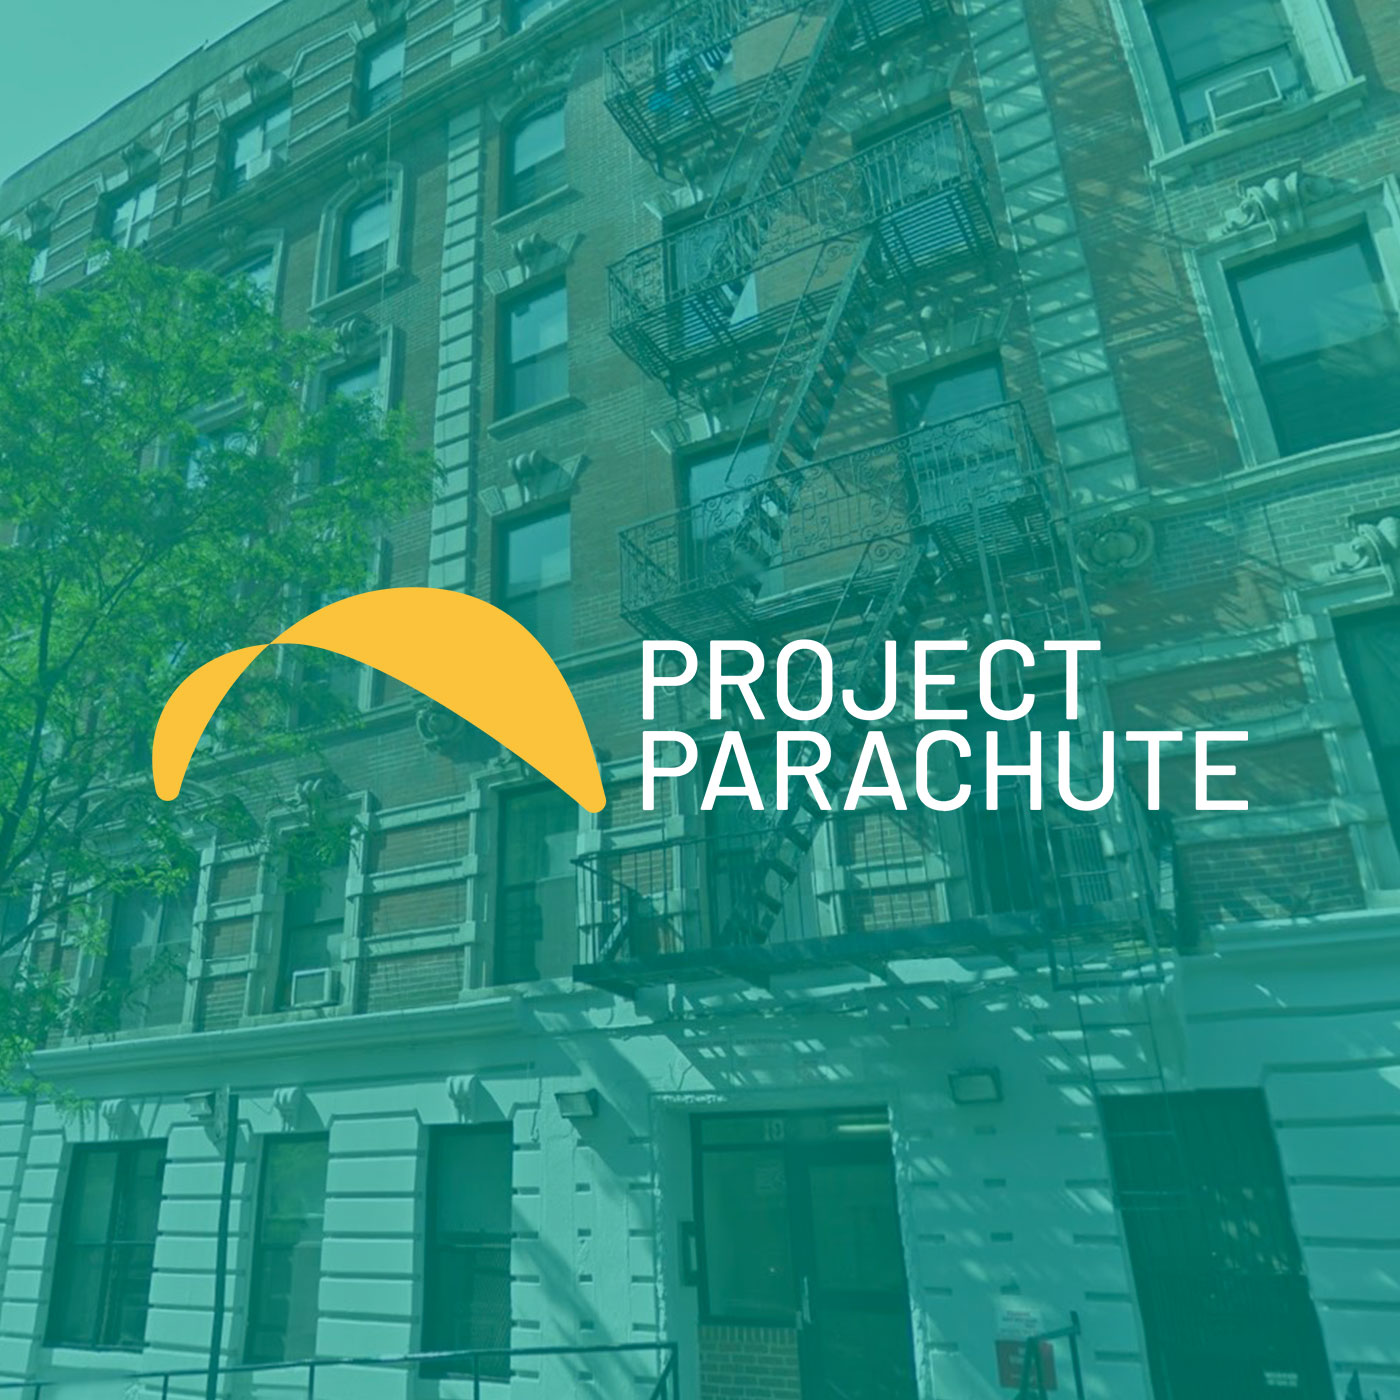 An image of the West 107th building with Project Parachute logo